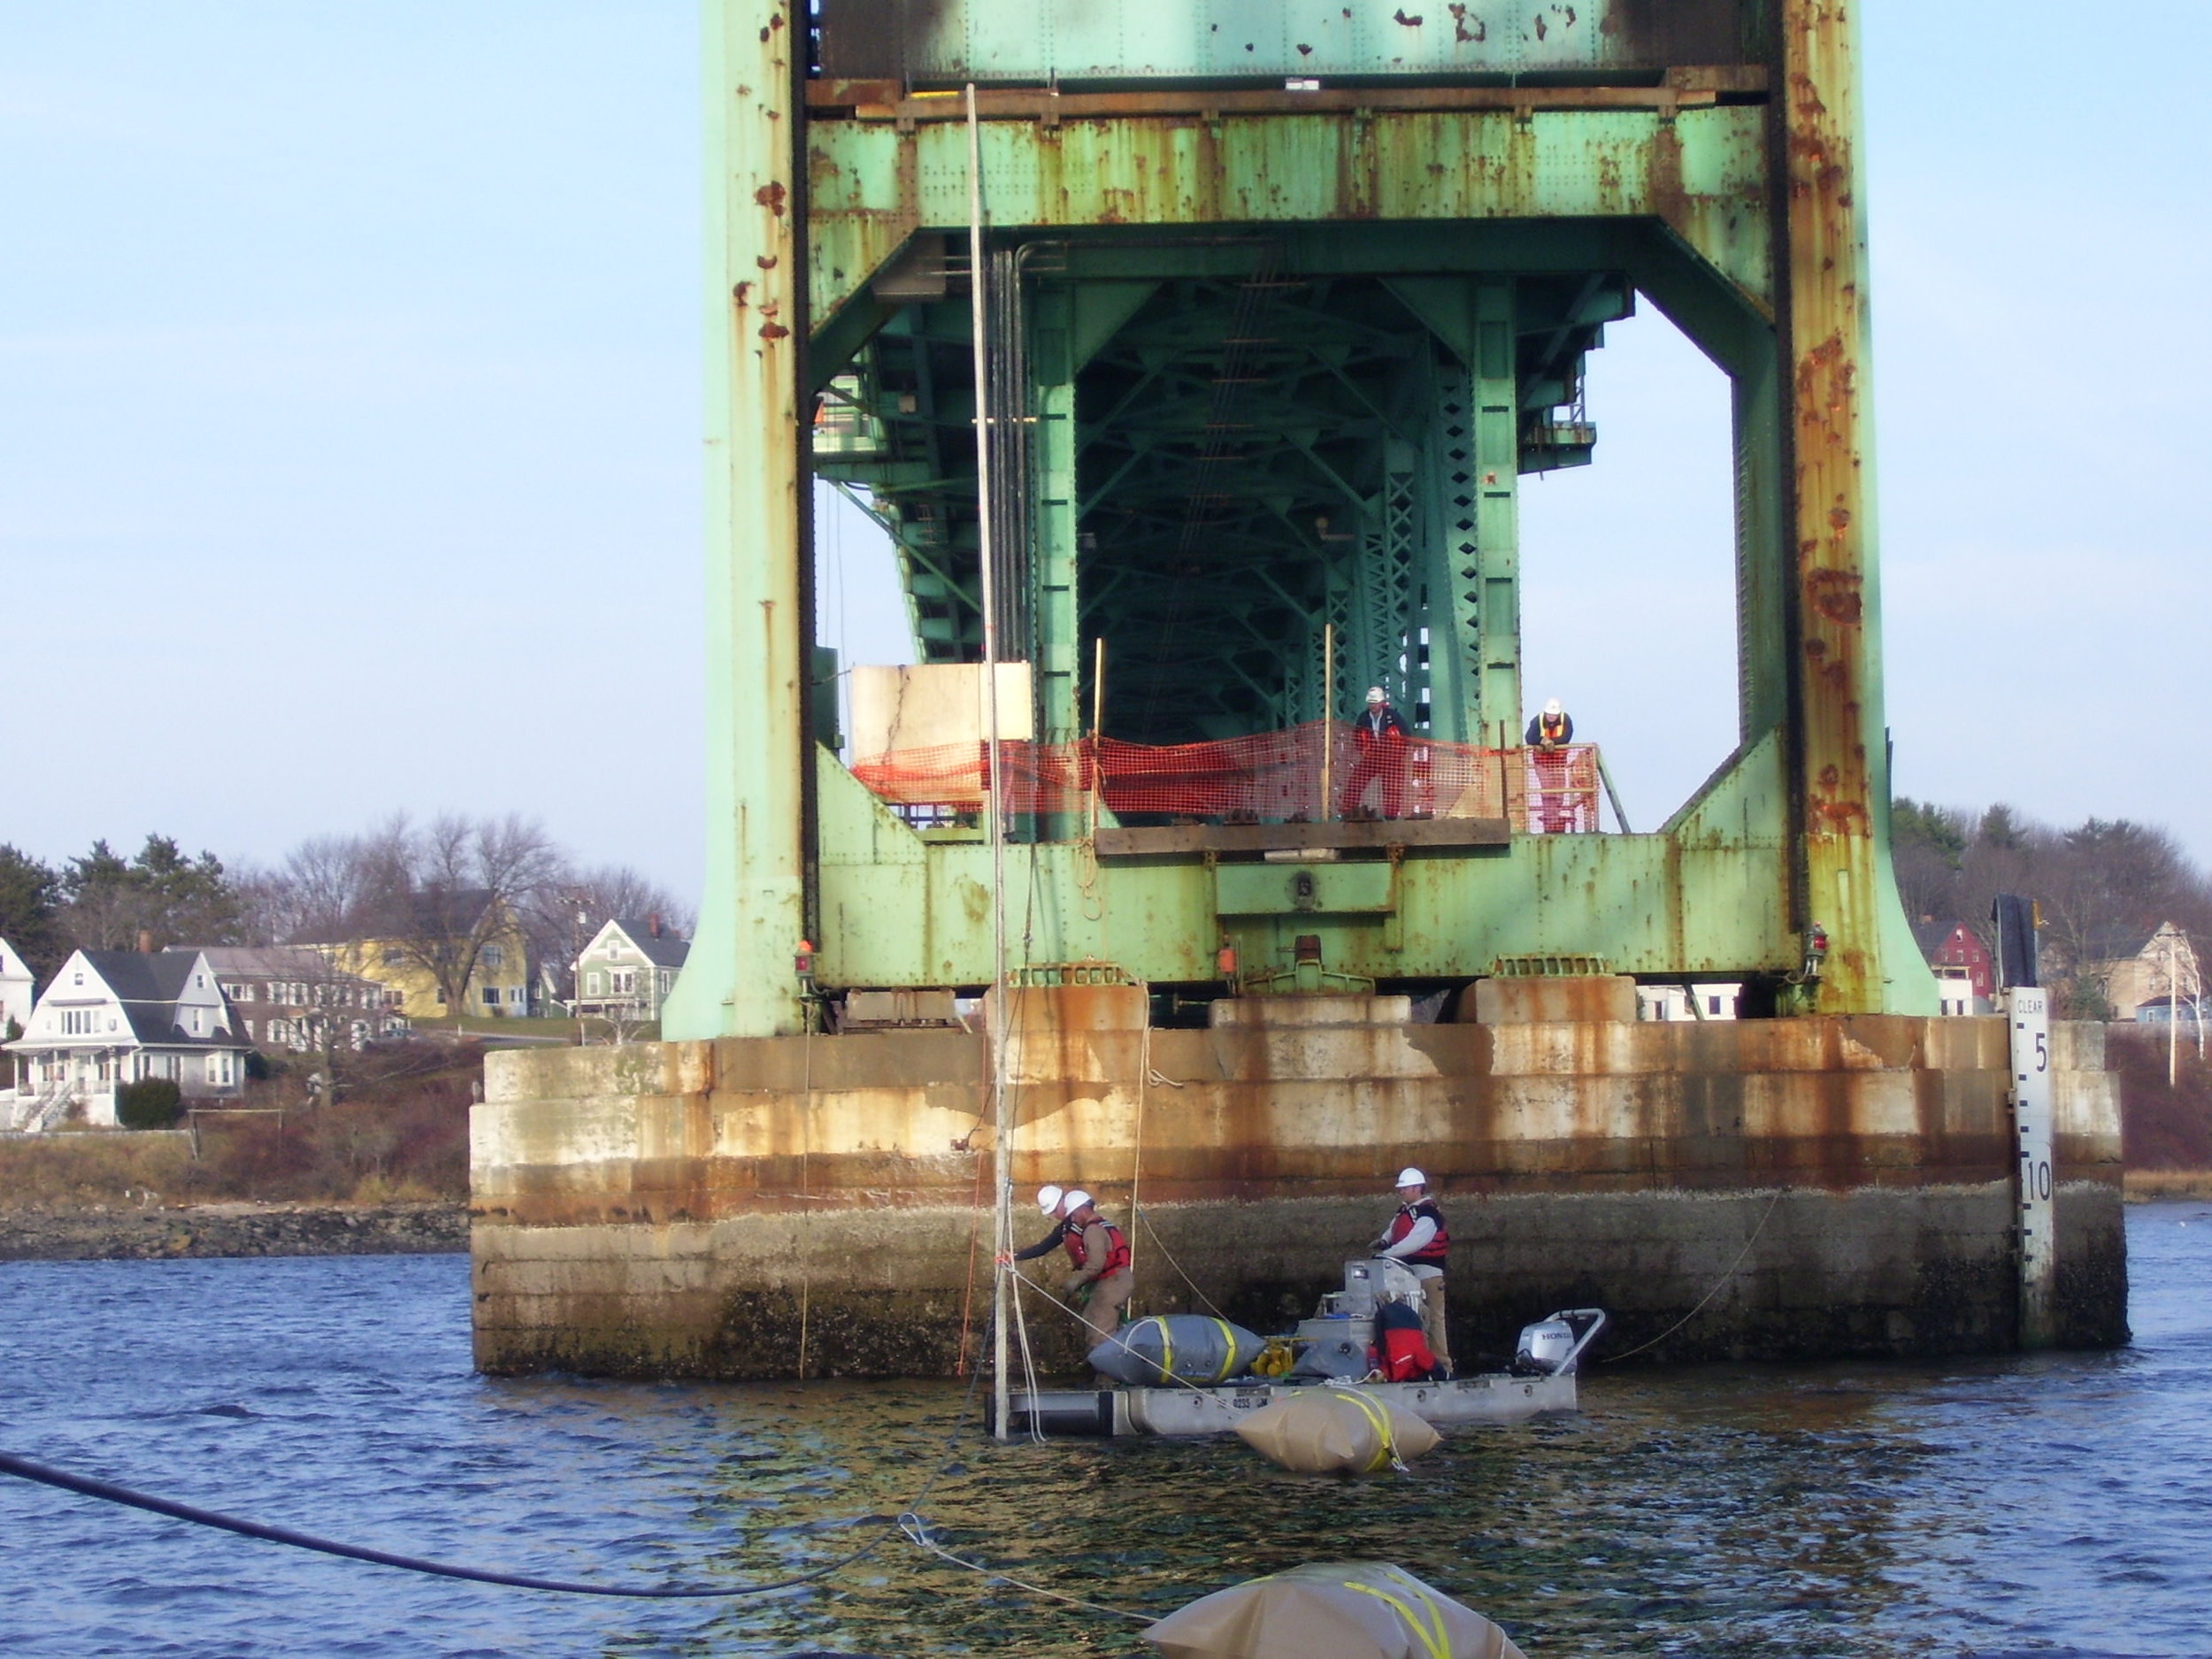 Bridge pier with new cable being deployed from bridge deck